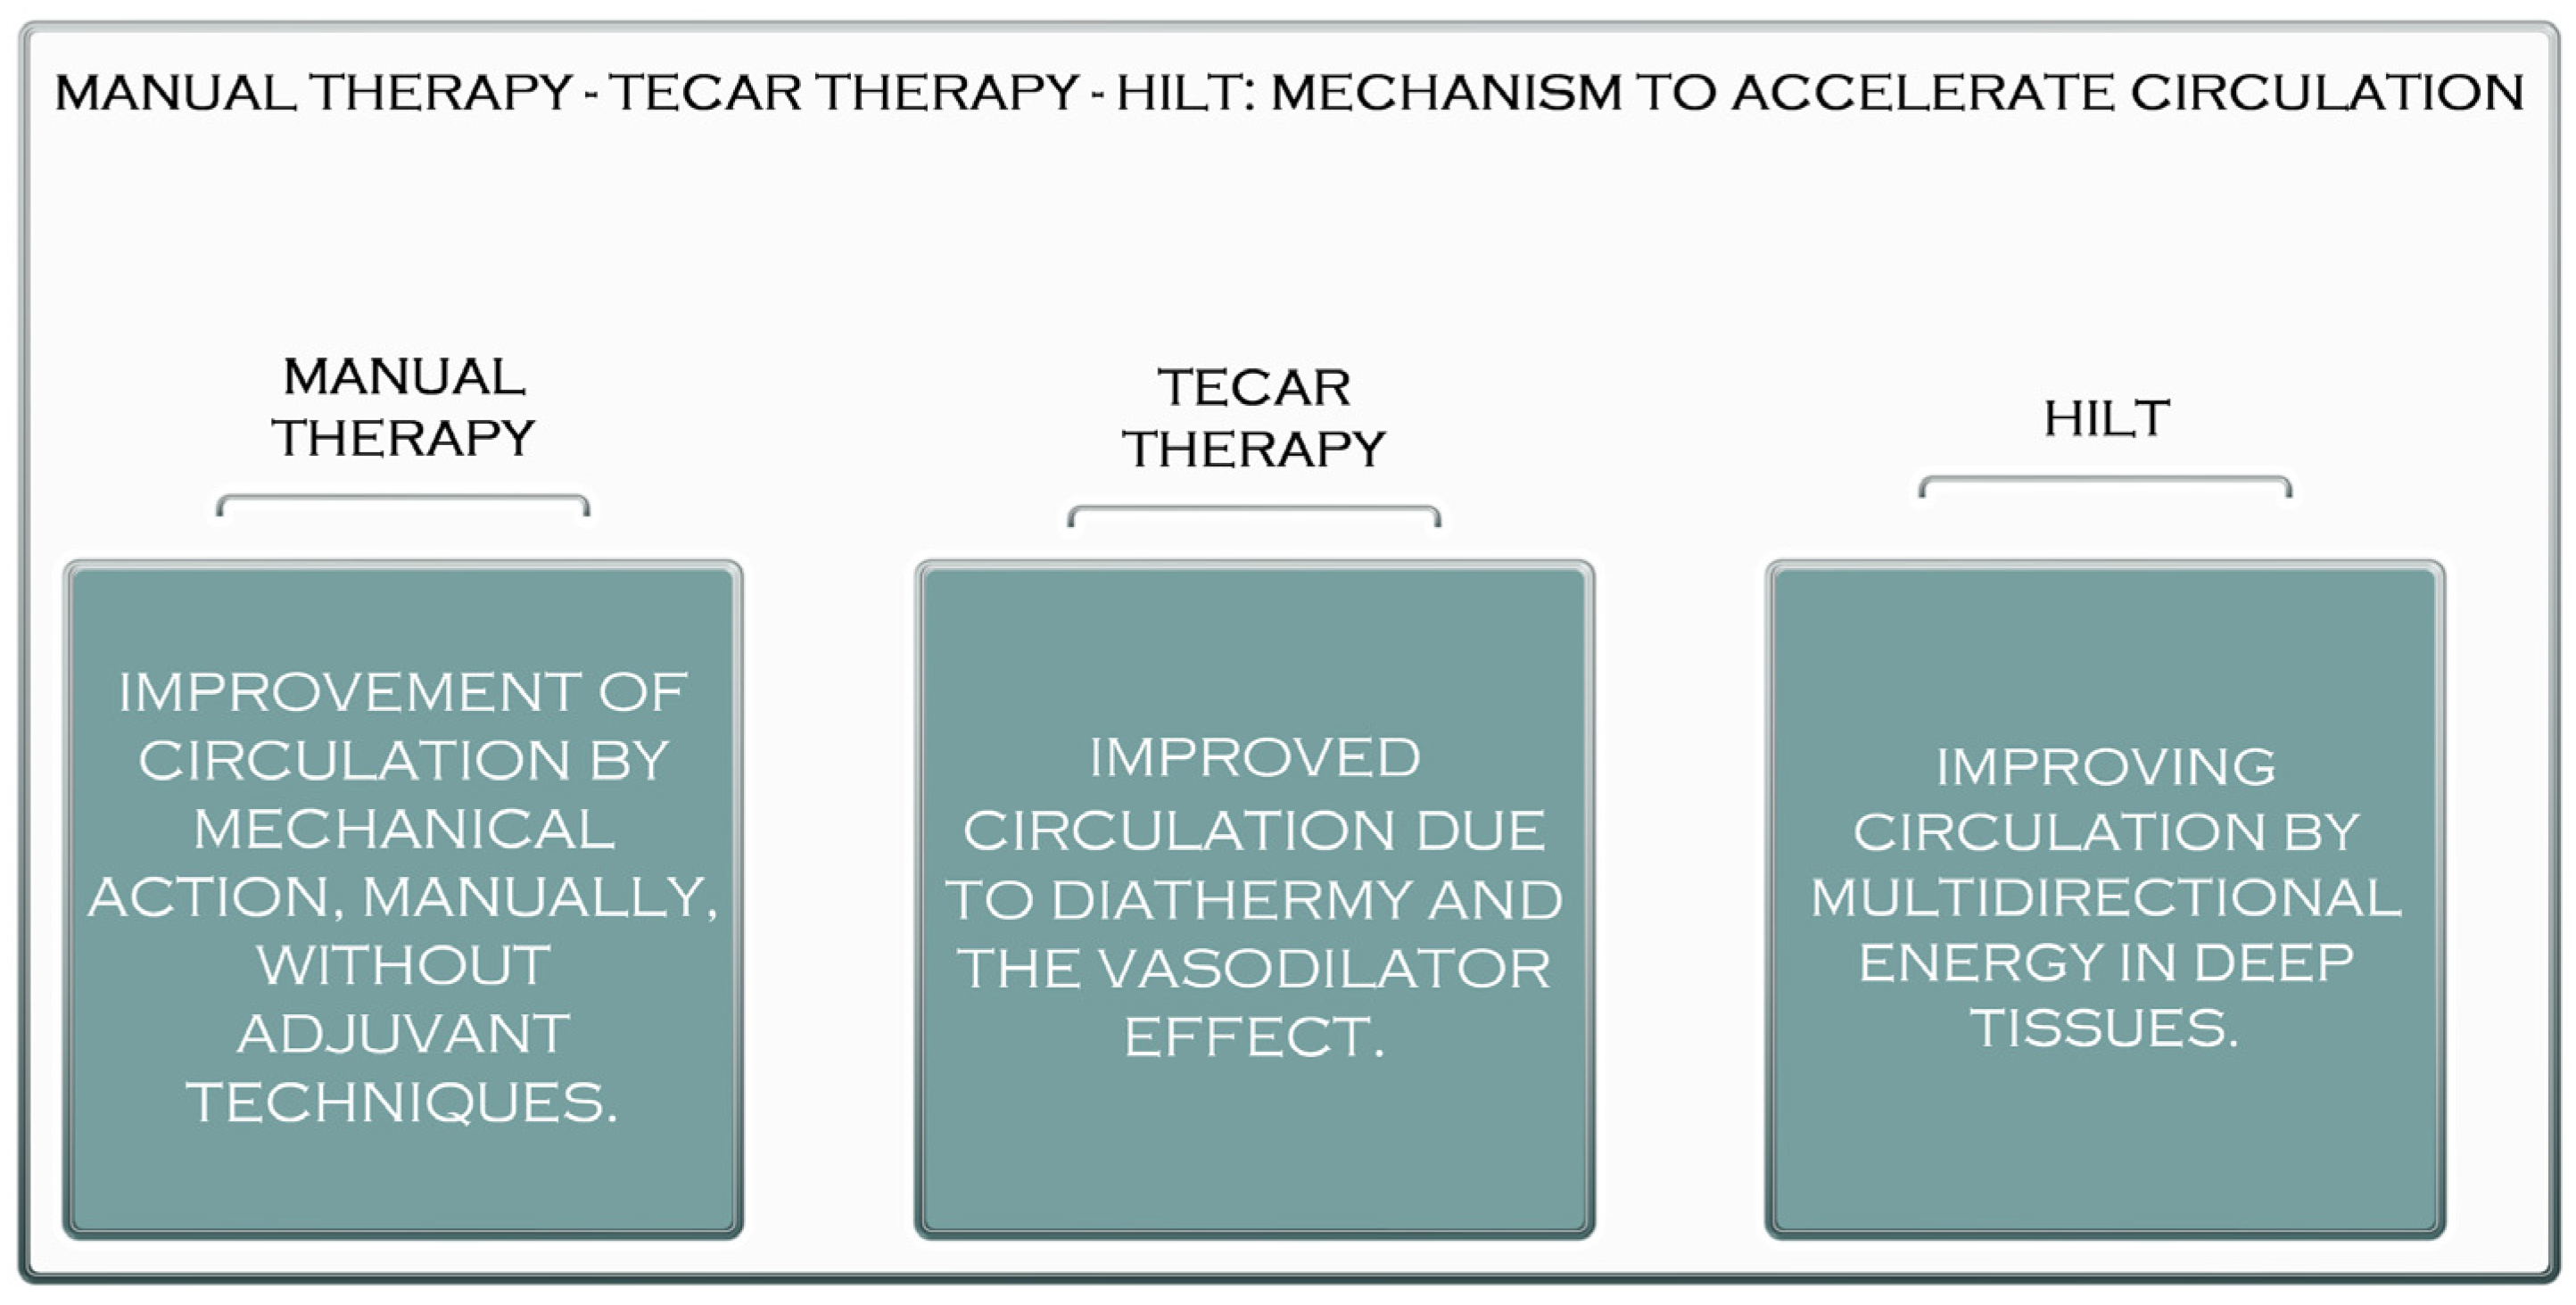 Tecar Xxx Video - TECAR Therapy, High-Intensity Laser Therapy, Manual Therapy | Encyclopedia  MDPI